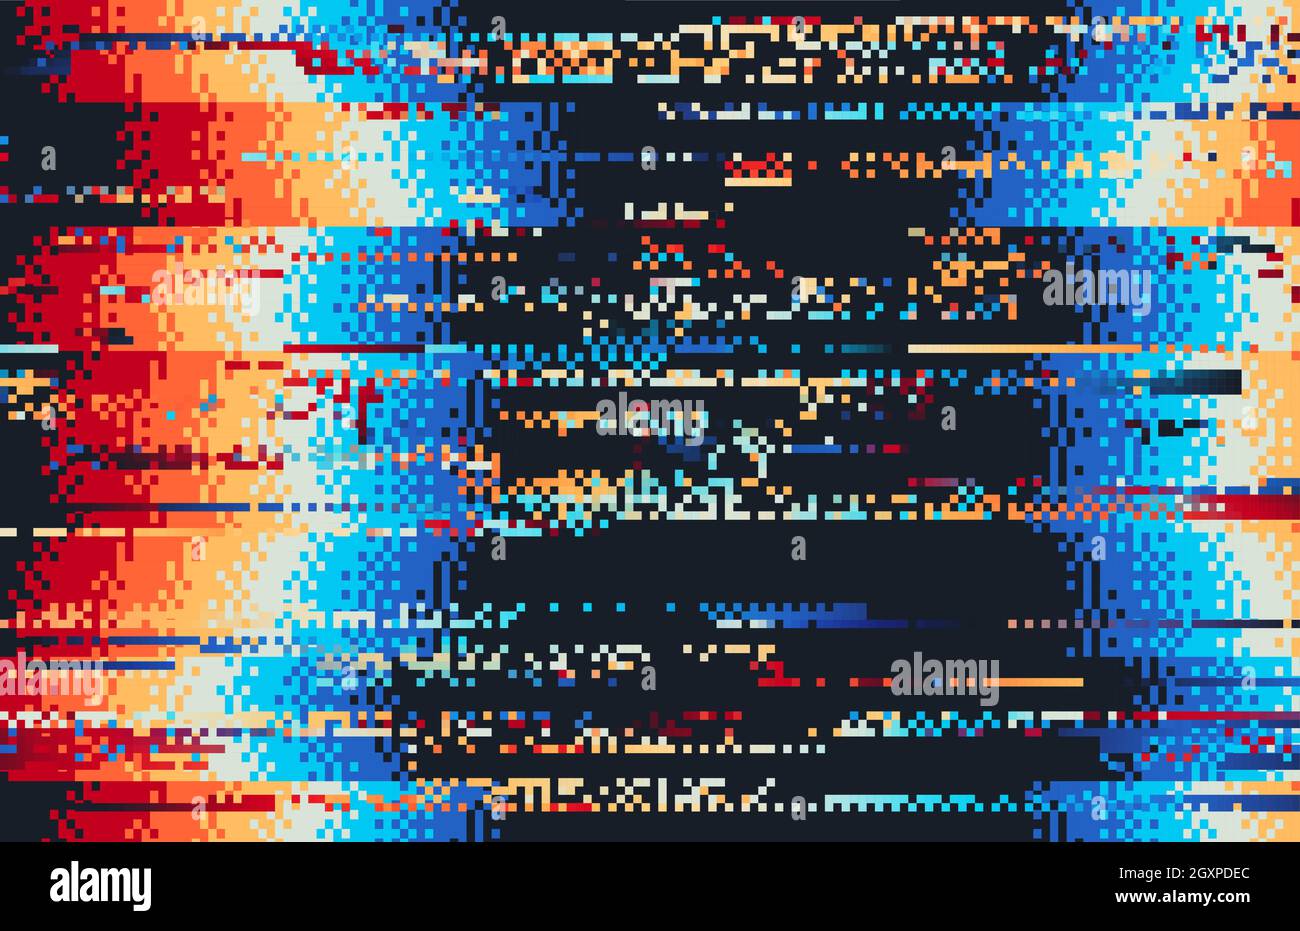 Digital Broken Screen Glitch Effect in Pixelated Style with